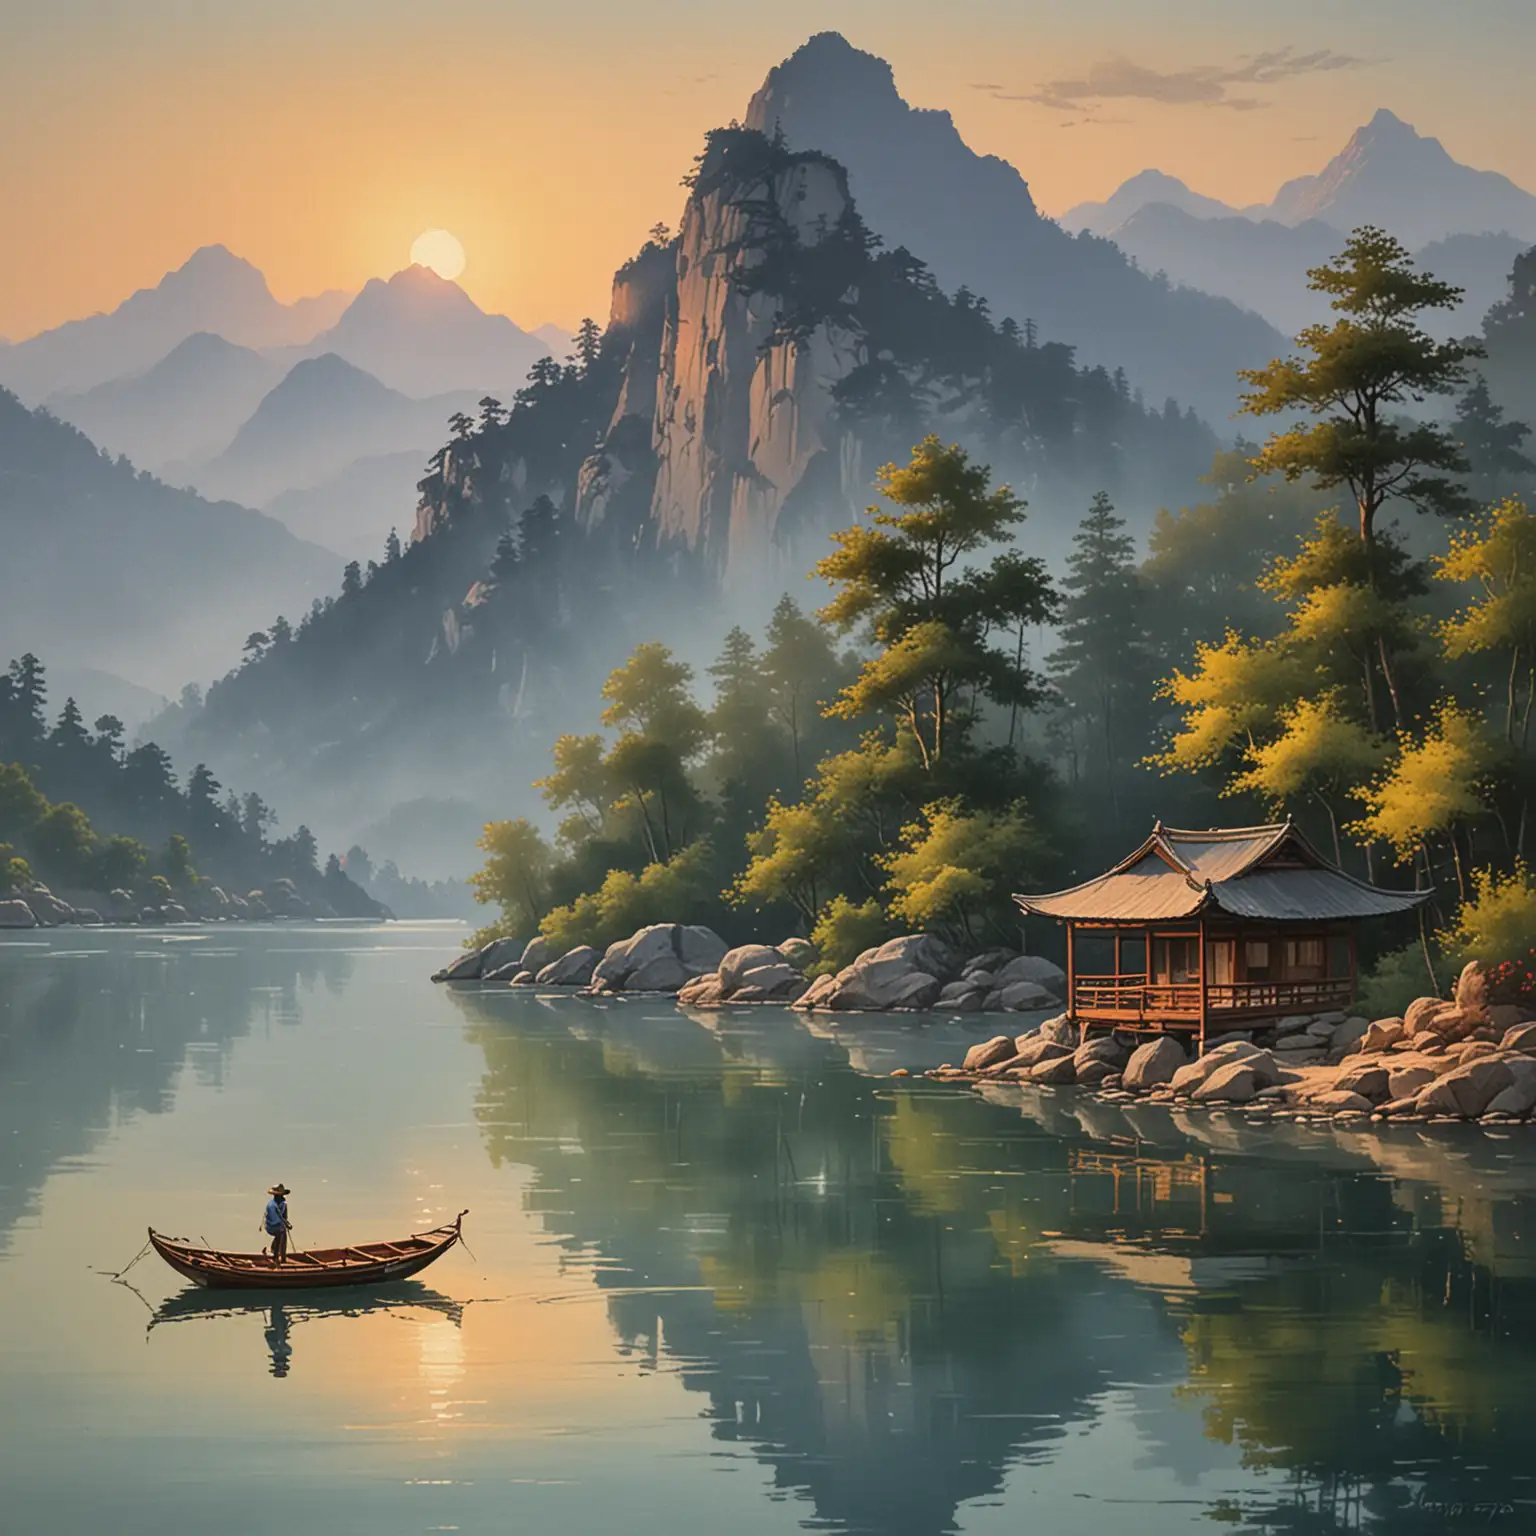 mountain and water painting, pavilion, small boat, evening